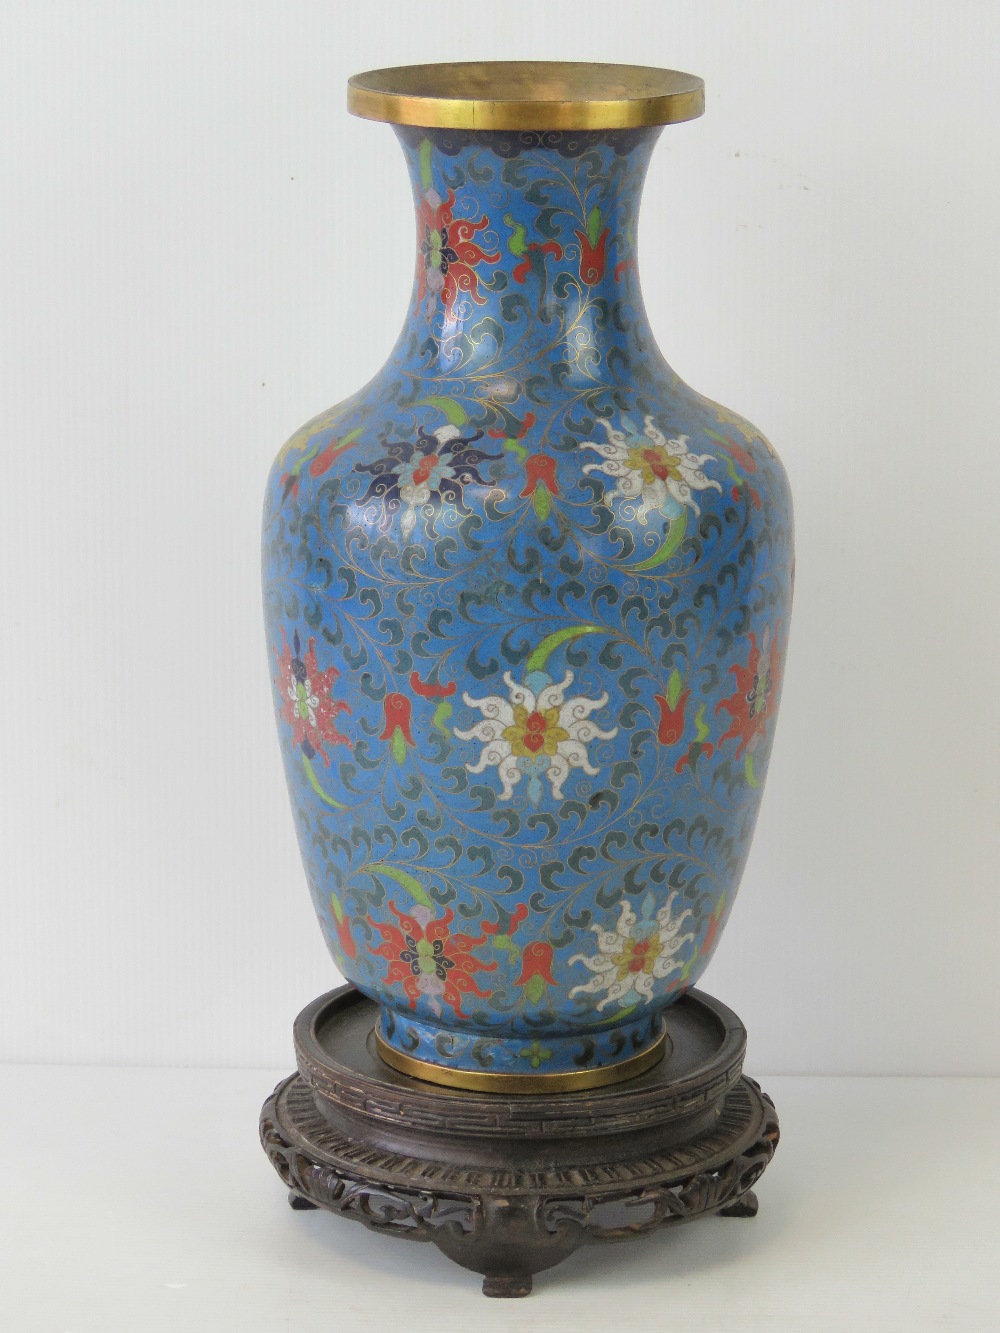 A fine early 20th century turquoise blue